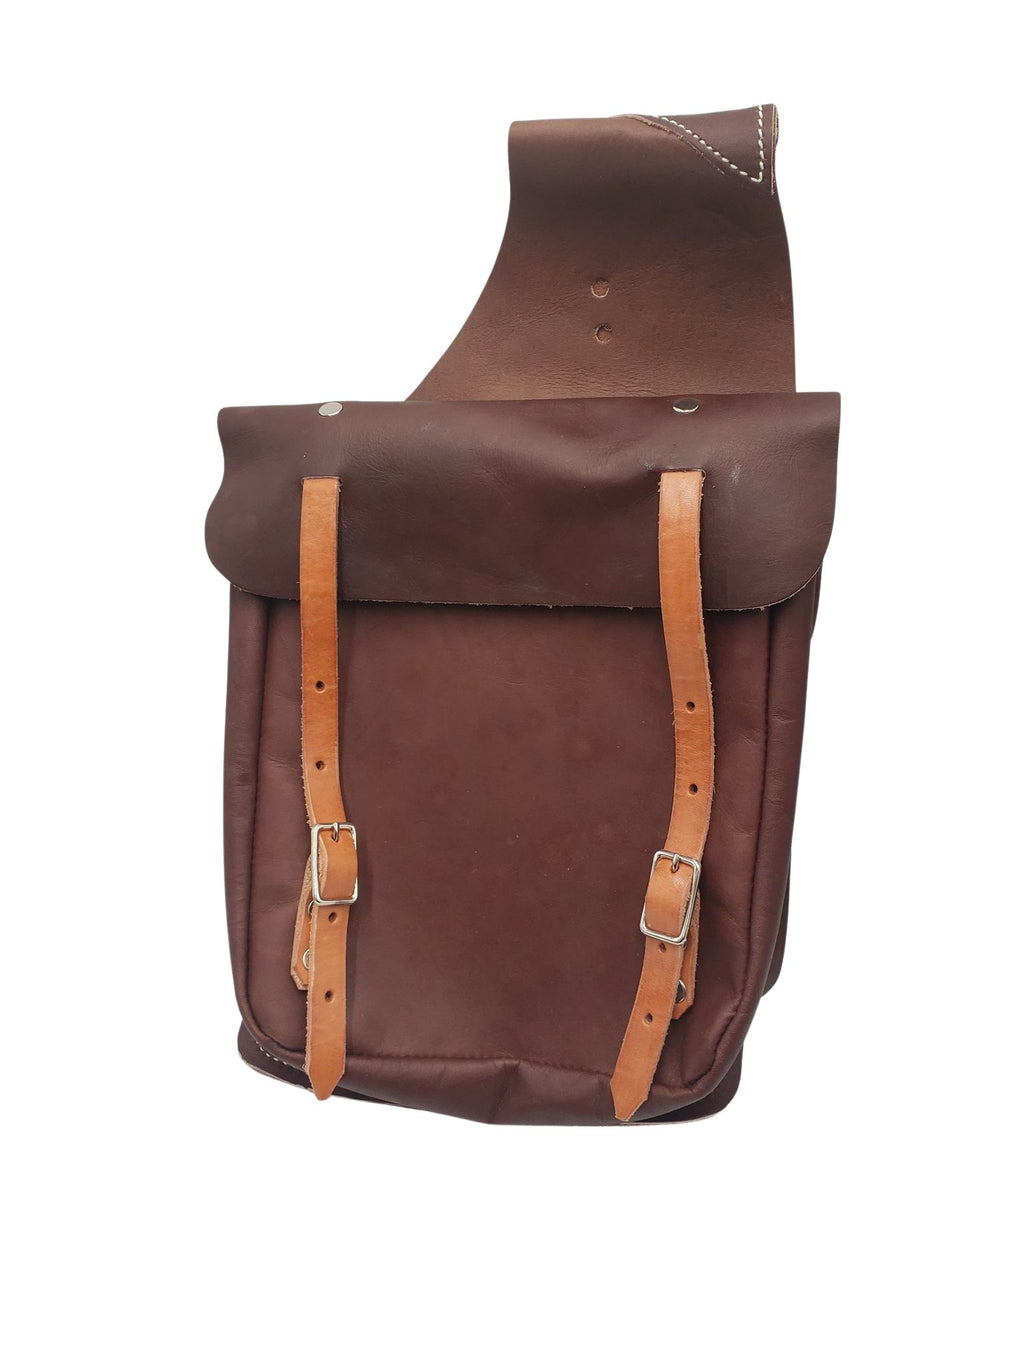 Chap Leather Saddle Bags